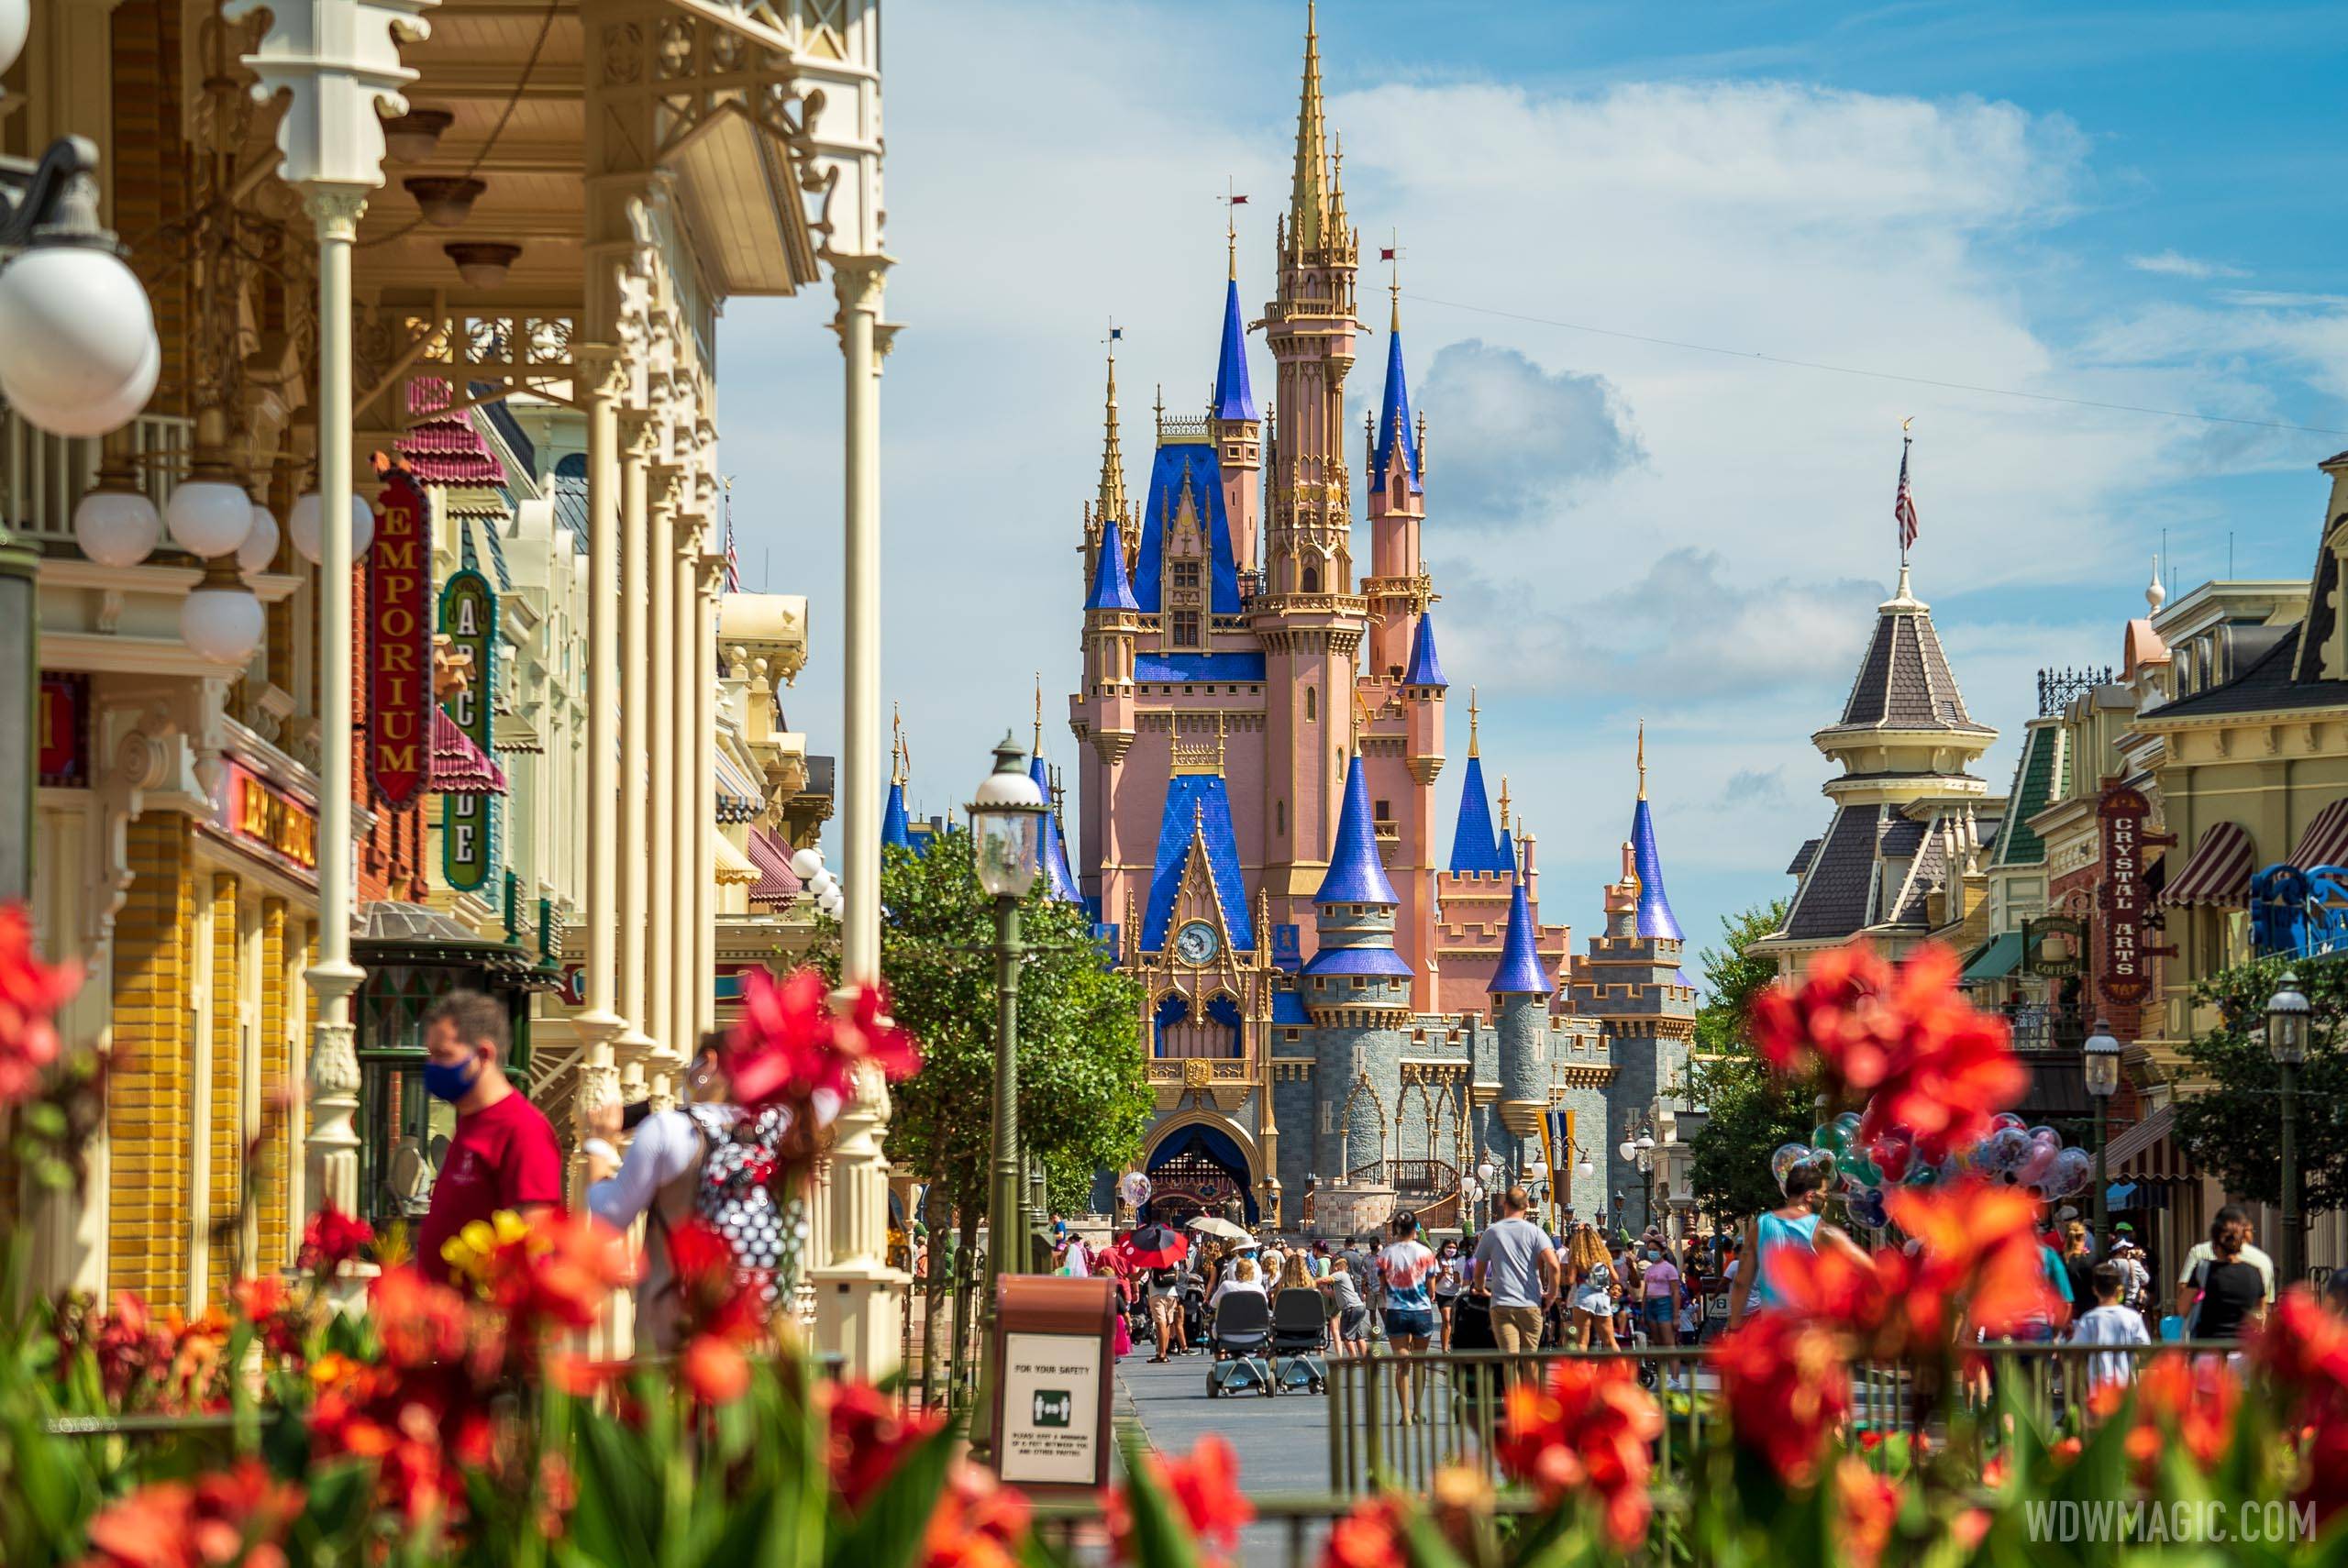 Many more Walt Disney World Cast Members will soon be able to receive the COVID-19 vaccine